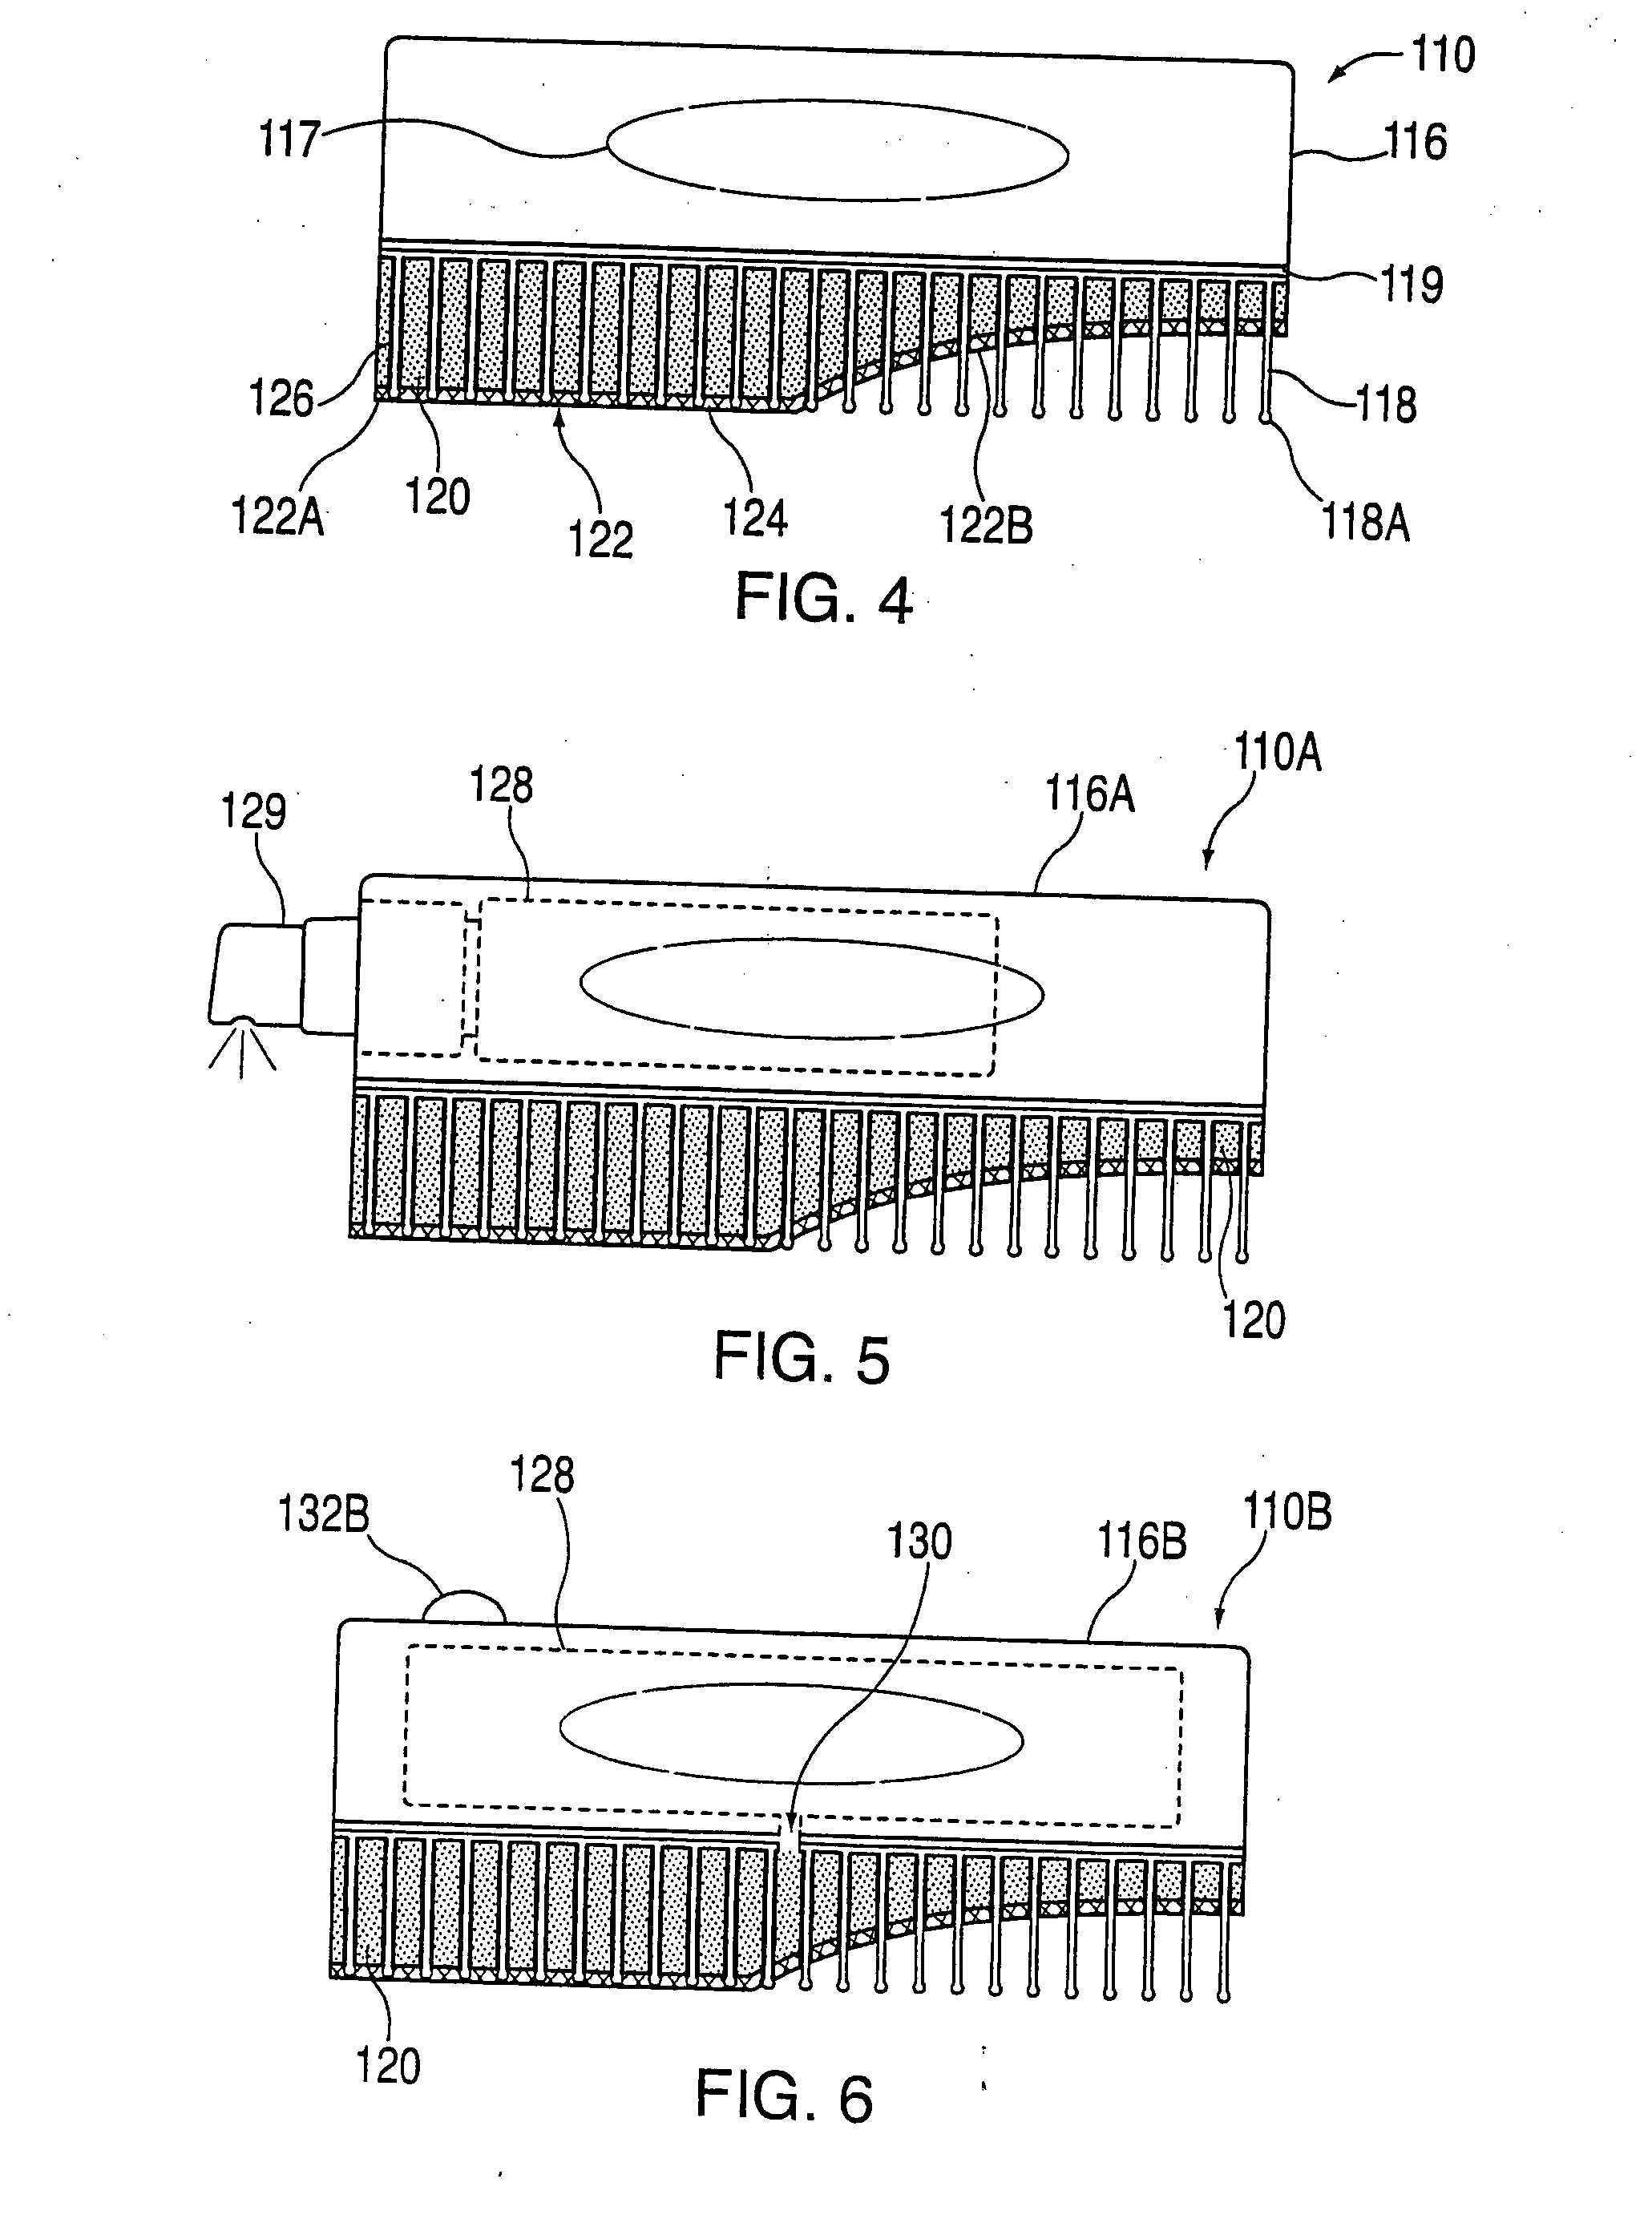 Self-cleaning brush with a flexible matrix